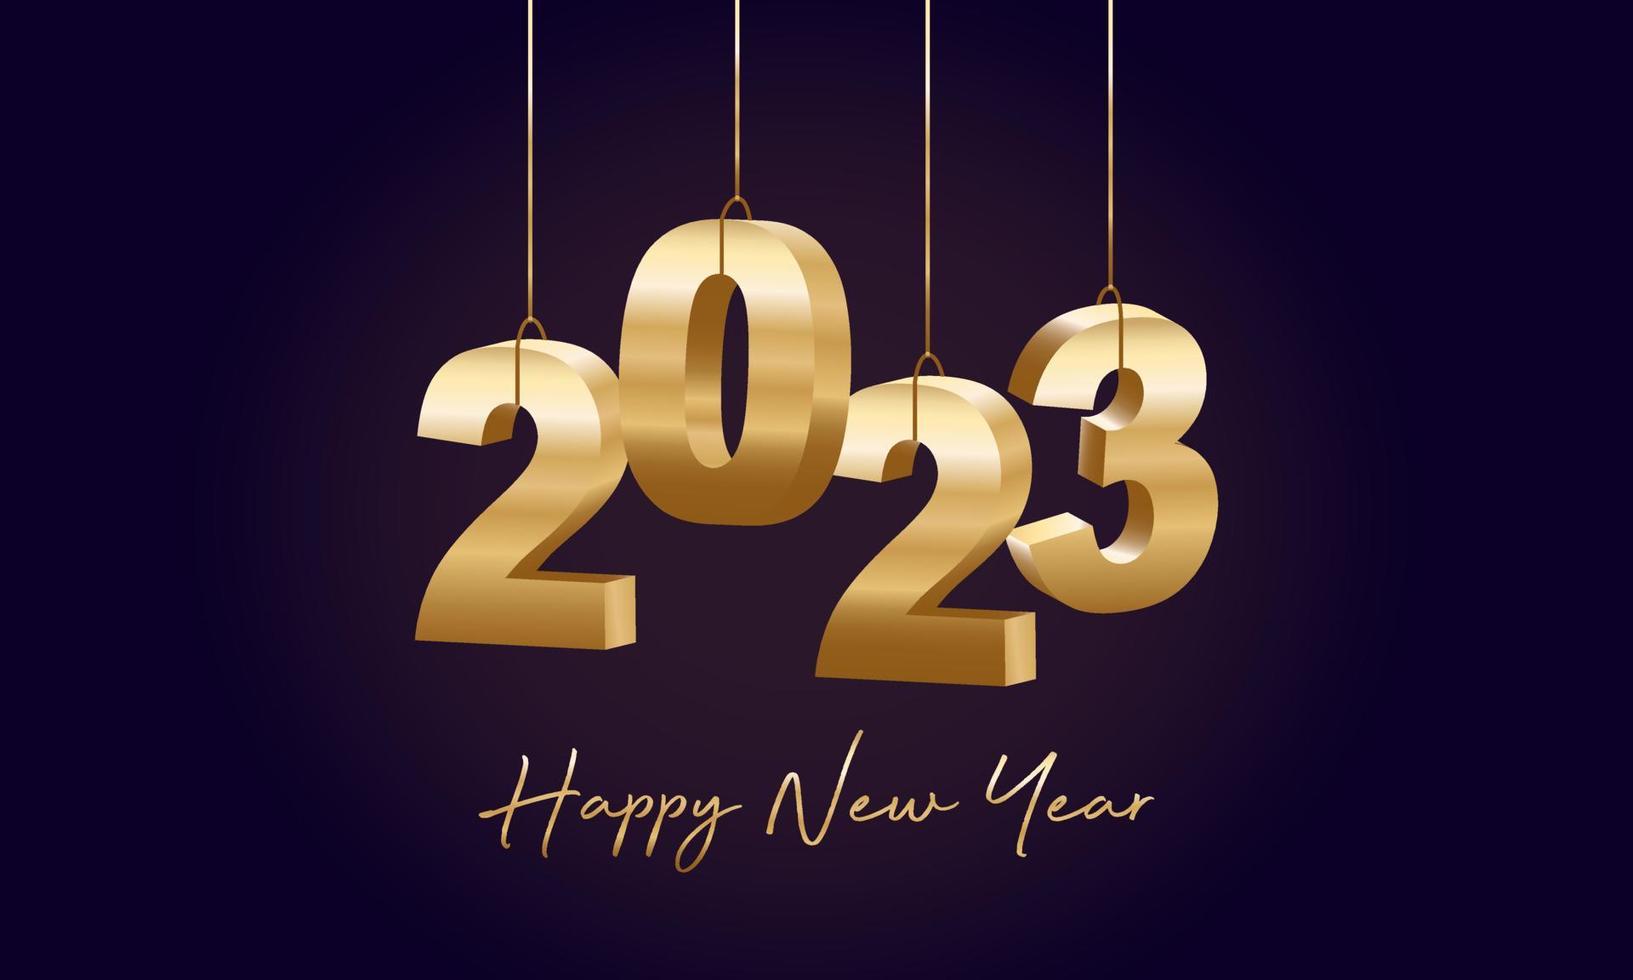 Happy New Year 2023. Hanging golden 3D numbers with ribbons, Modern Happy New Year Background vector